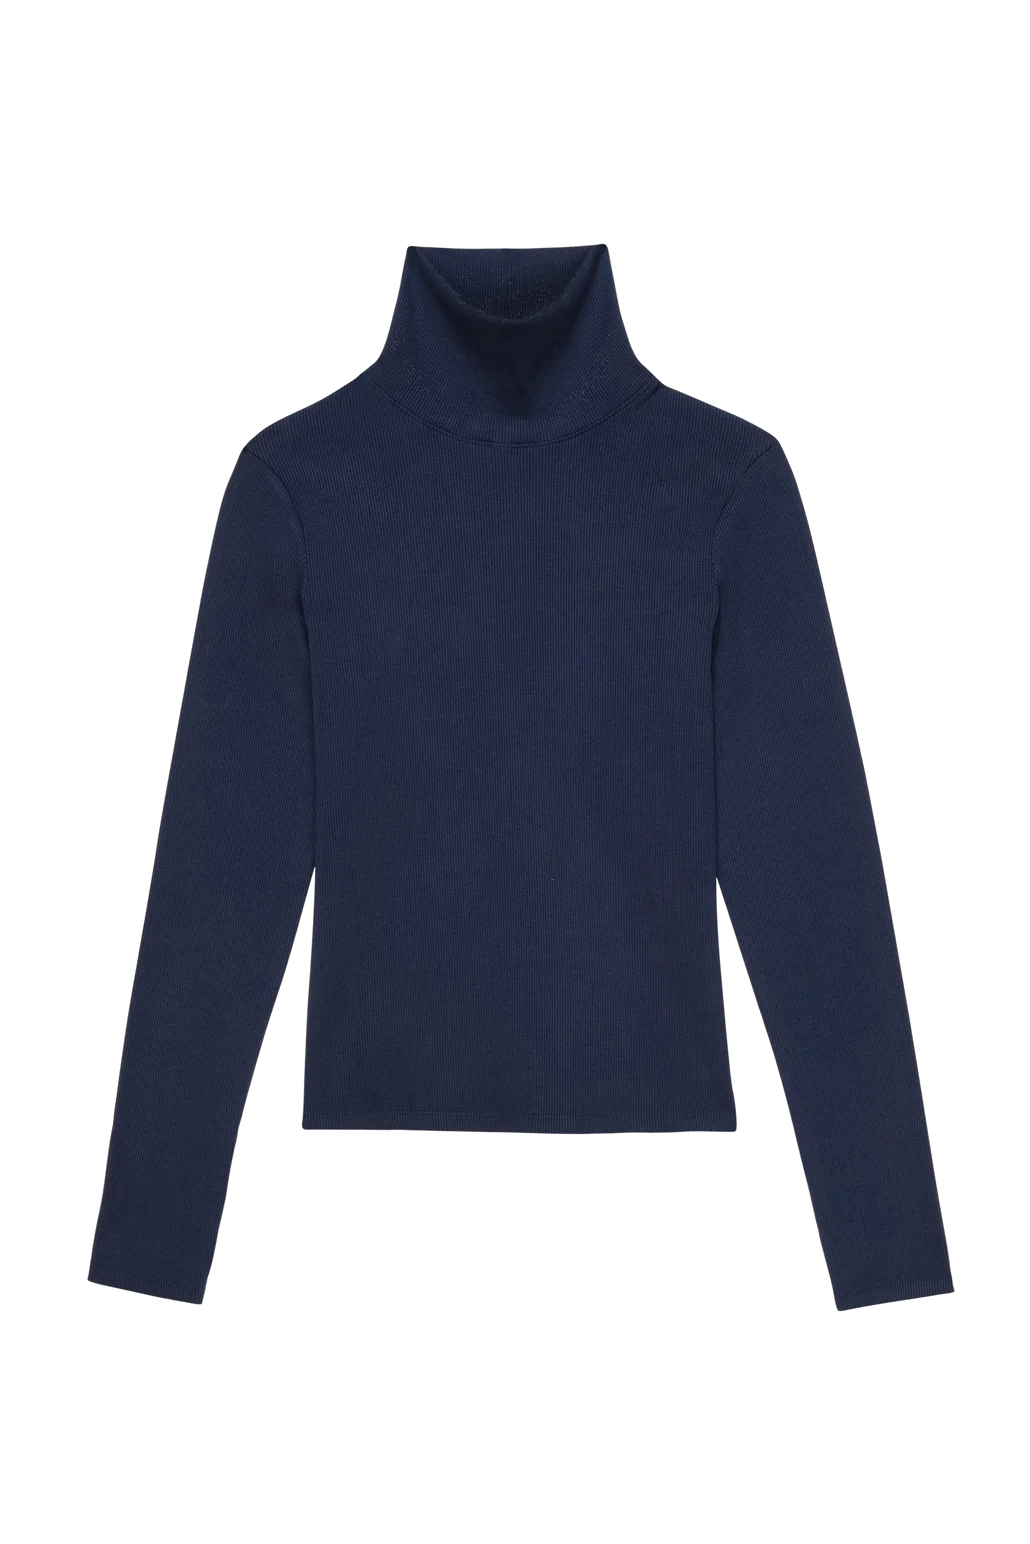 A flat lay image of the front of the Rib Turtleneck in navy